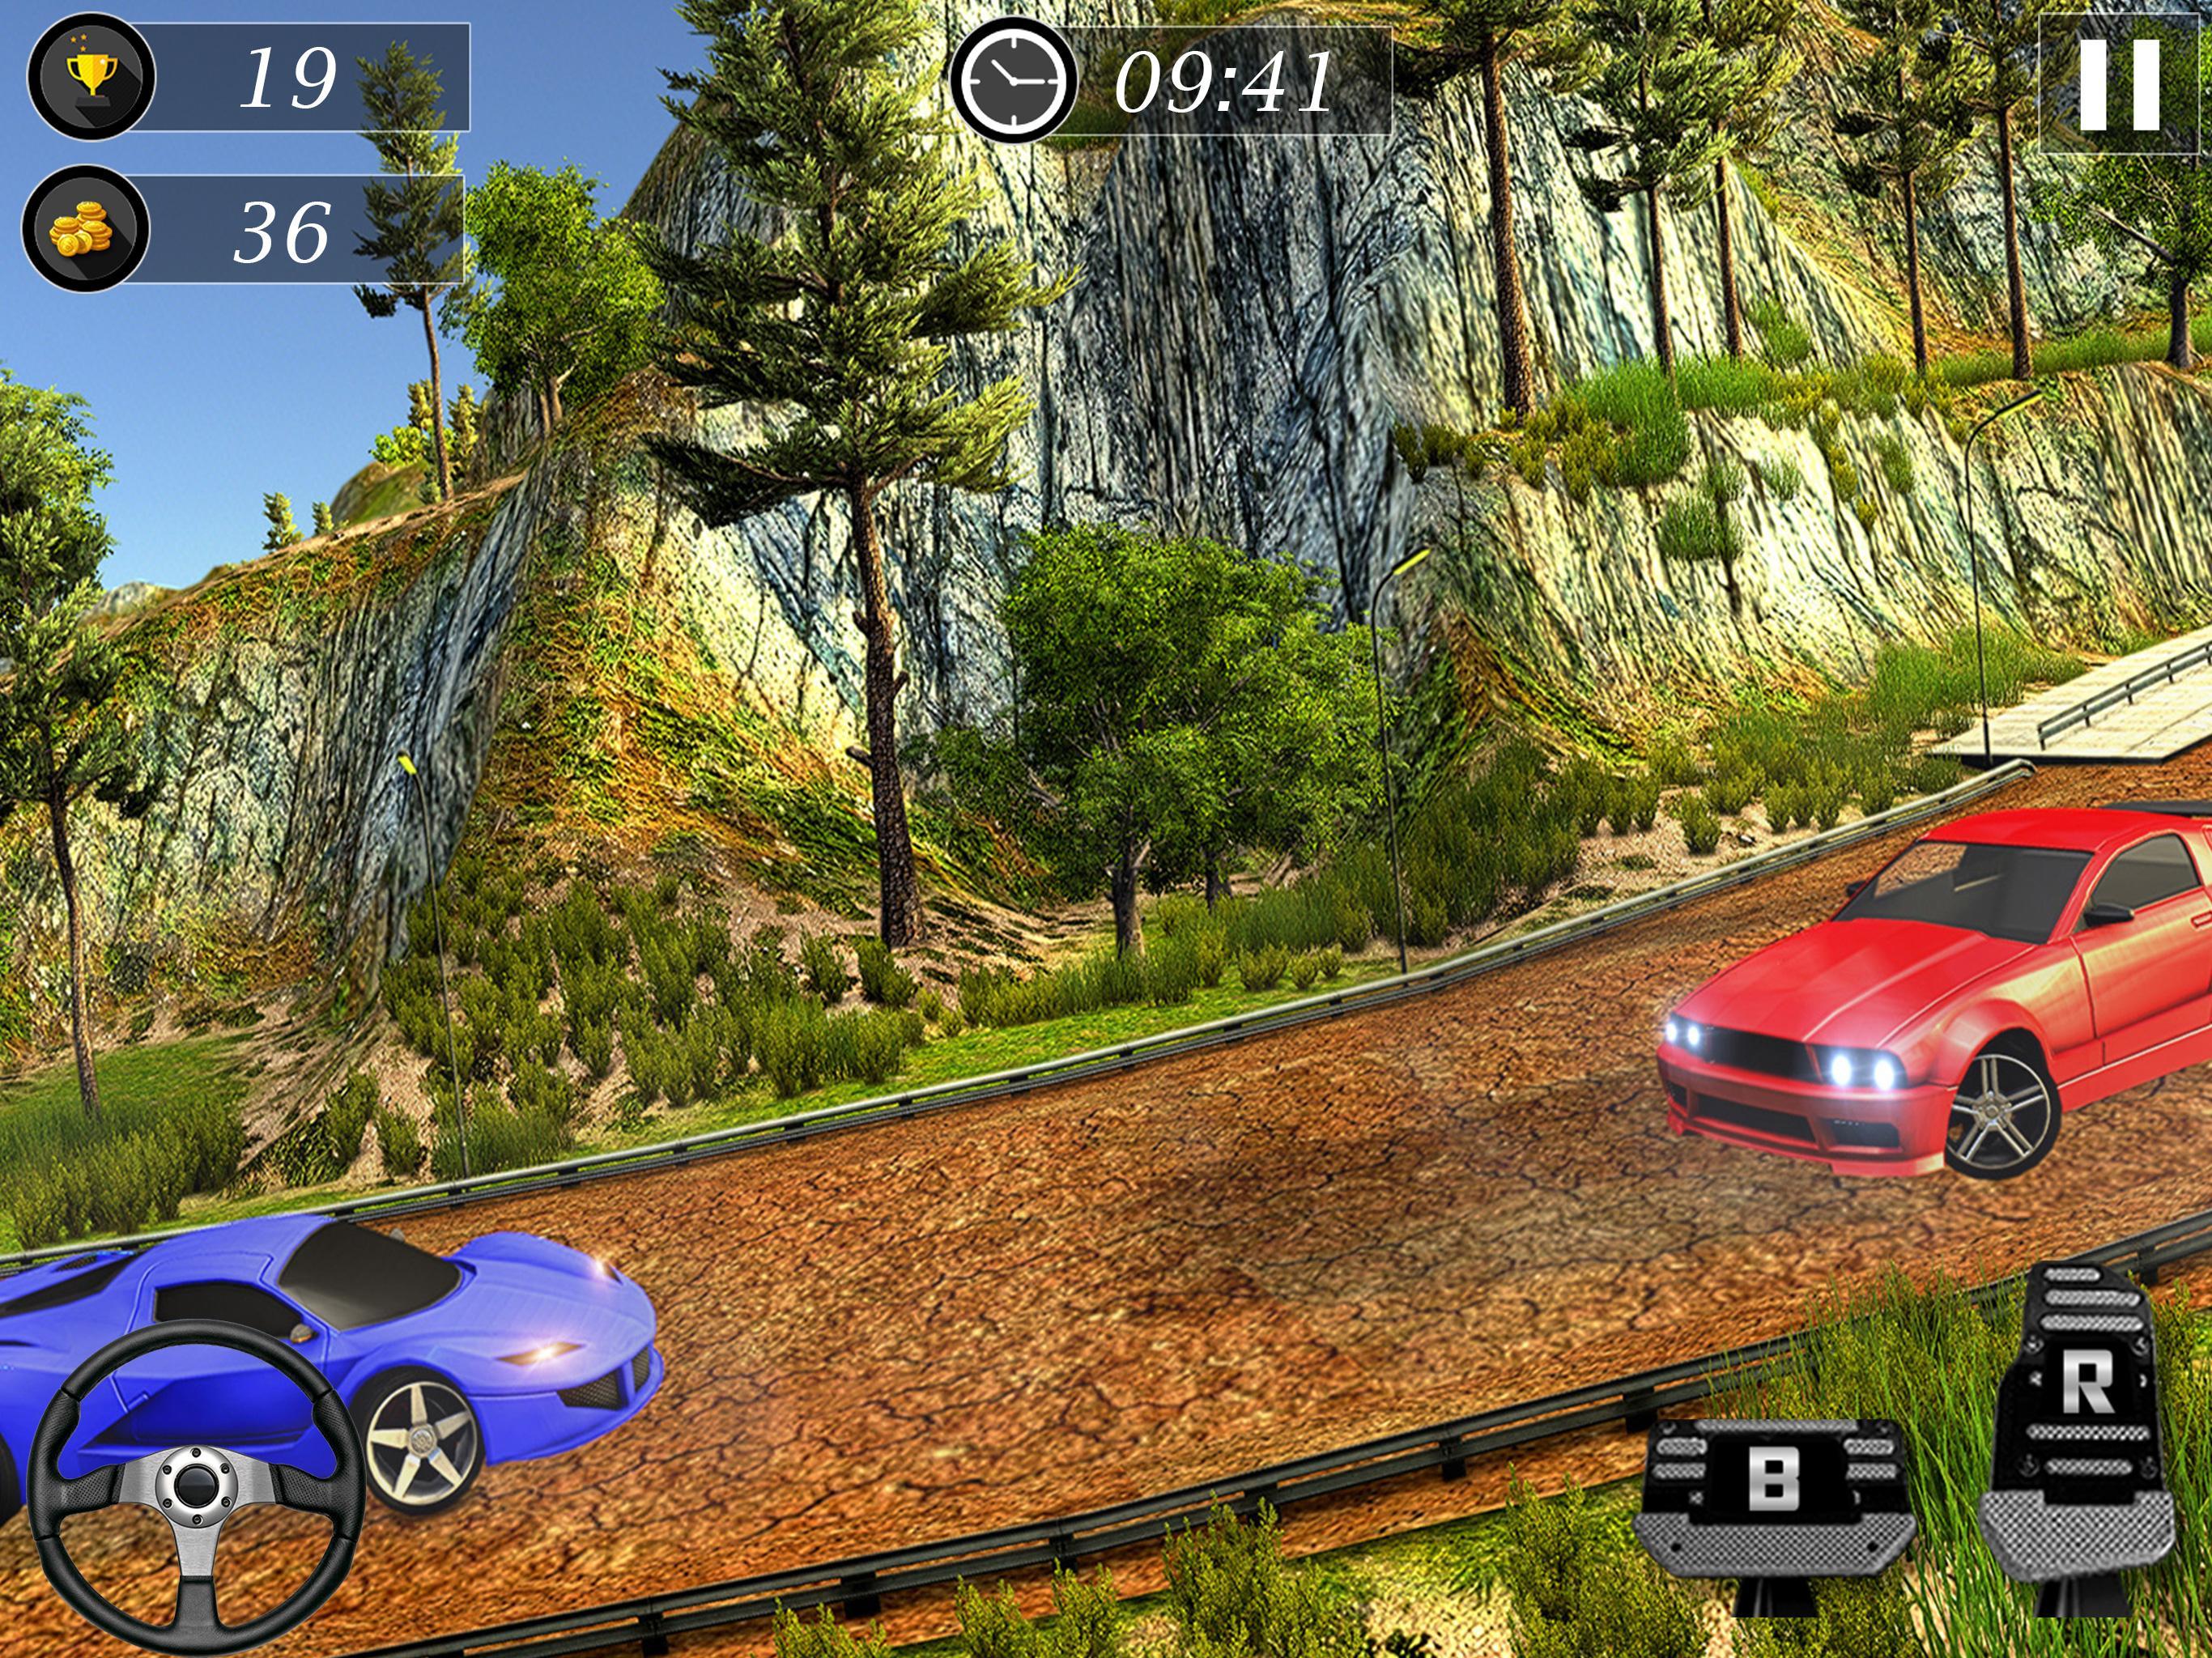 Offroad car driving game все открыта. Offroad car Driving. Offroad car Driving game. OTR Offroad car Driving game.